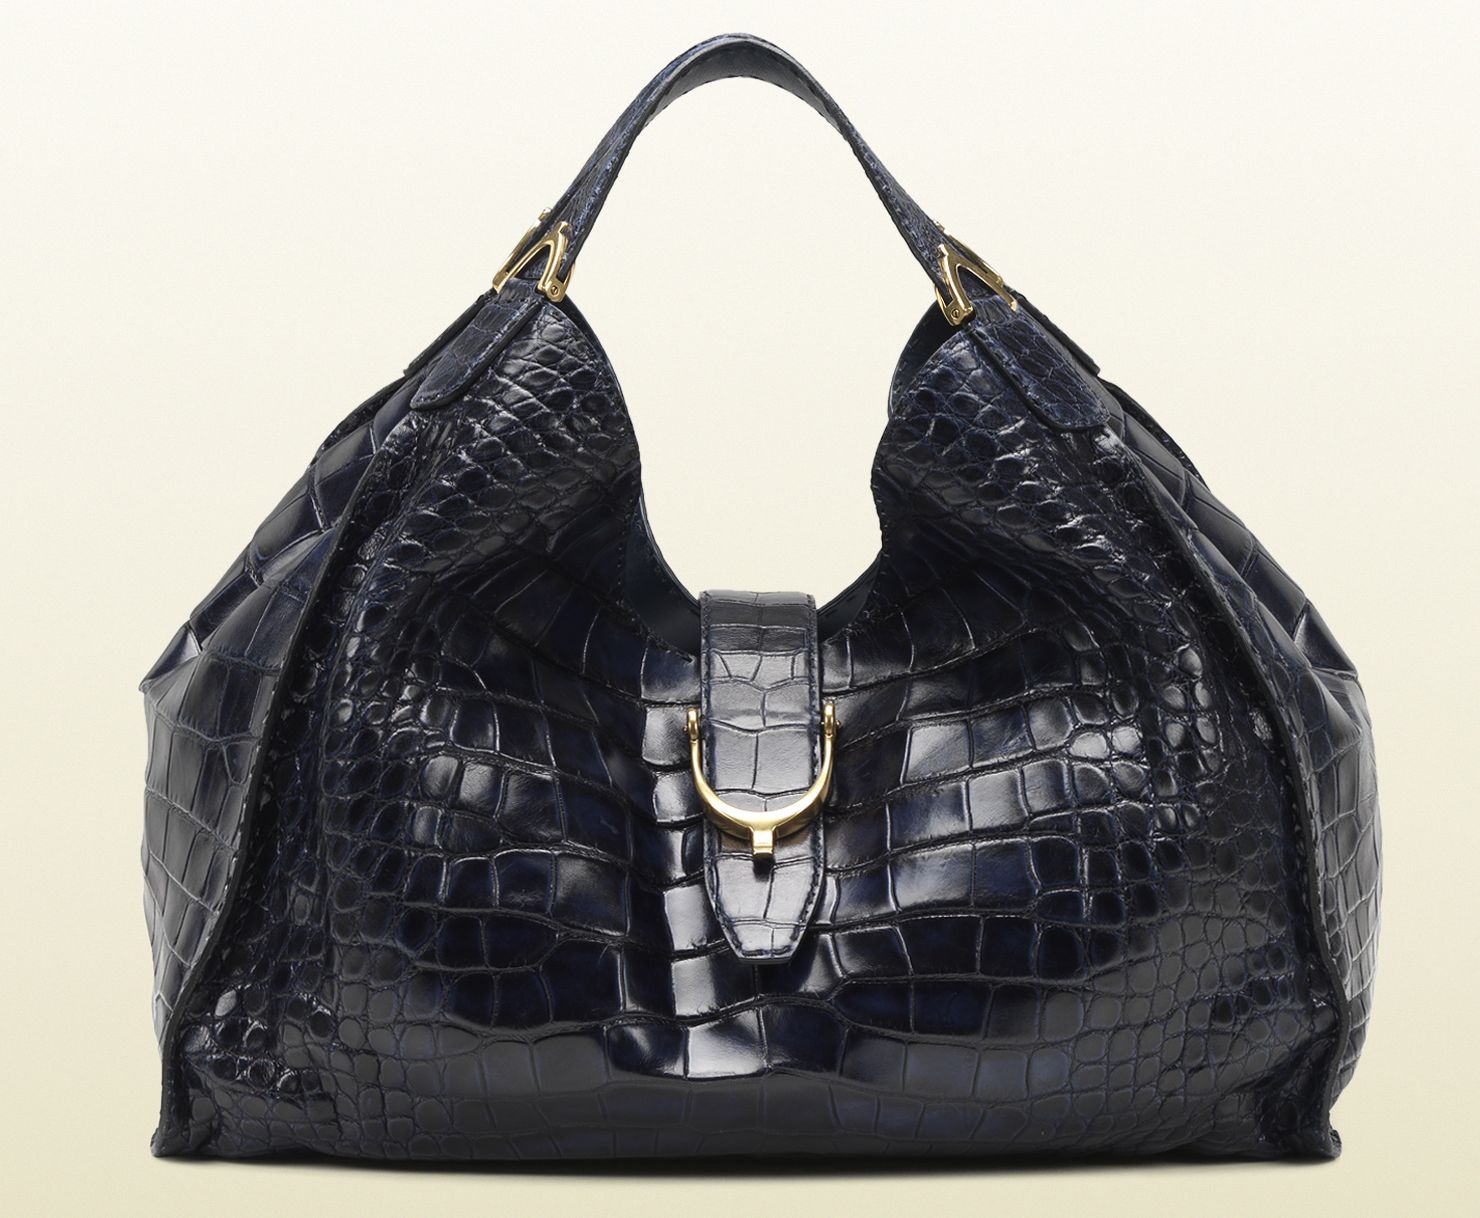 Handbags & Accessories: 8 Most Fashionable Handbags You Can Buy Online